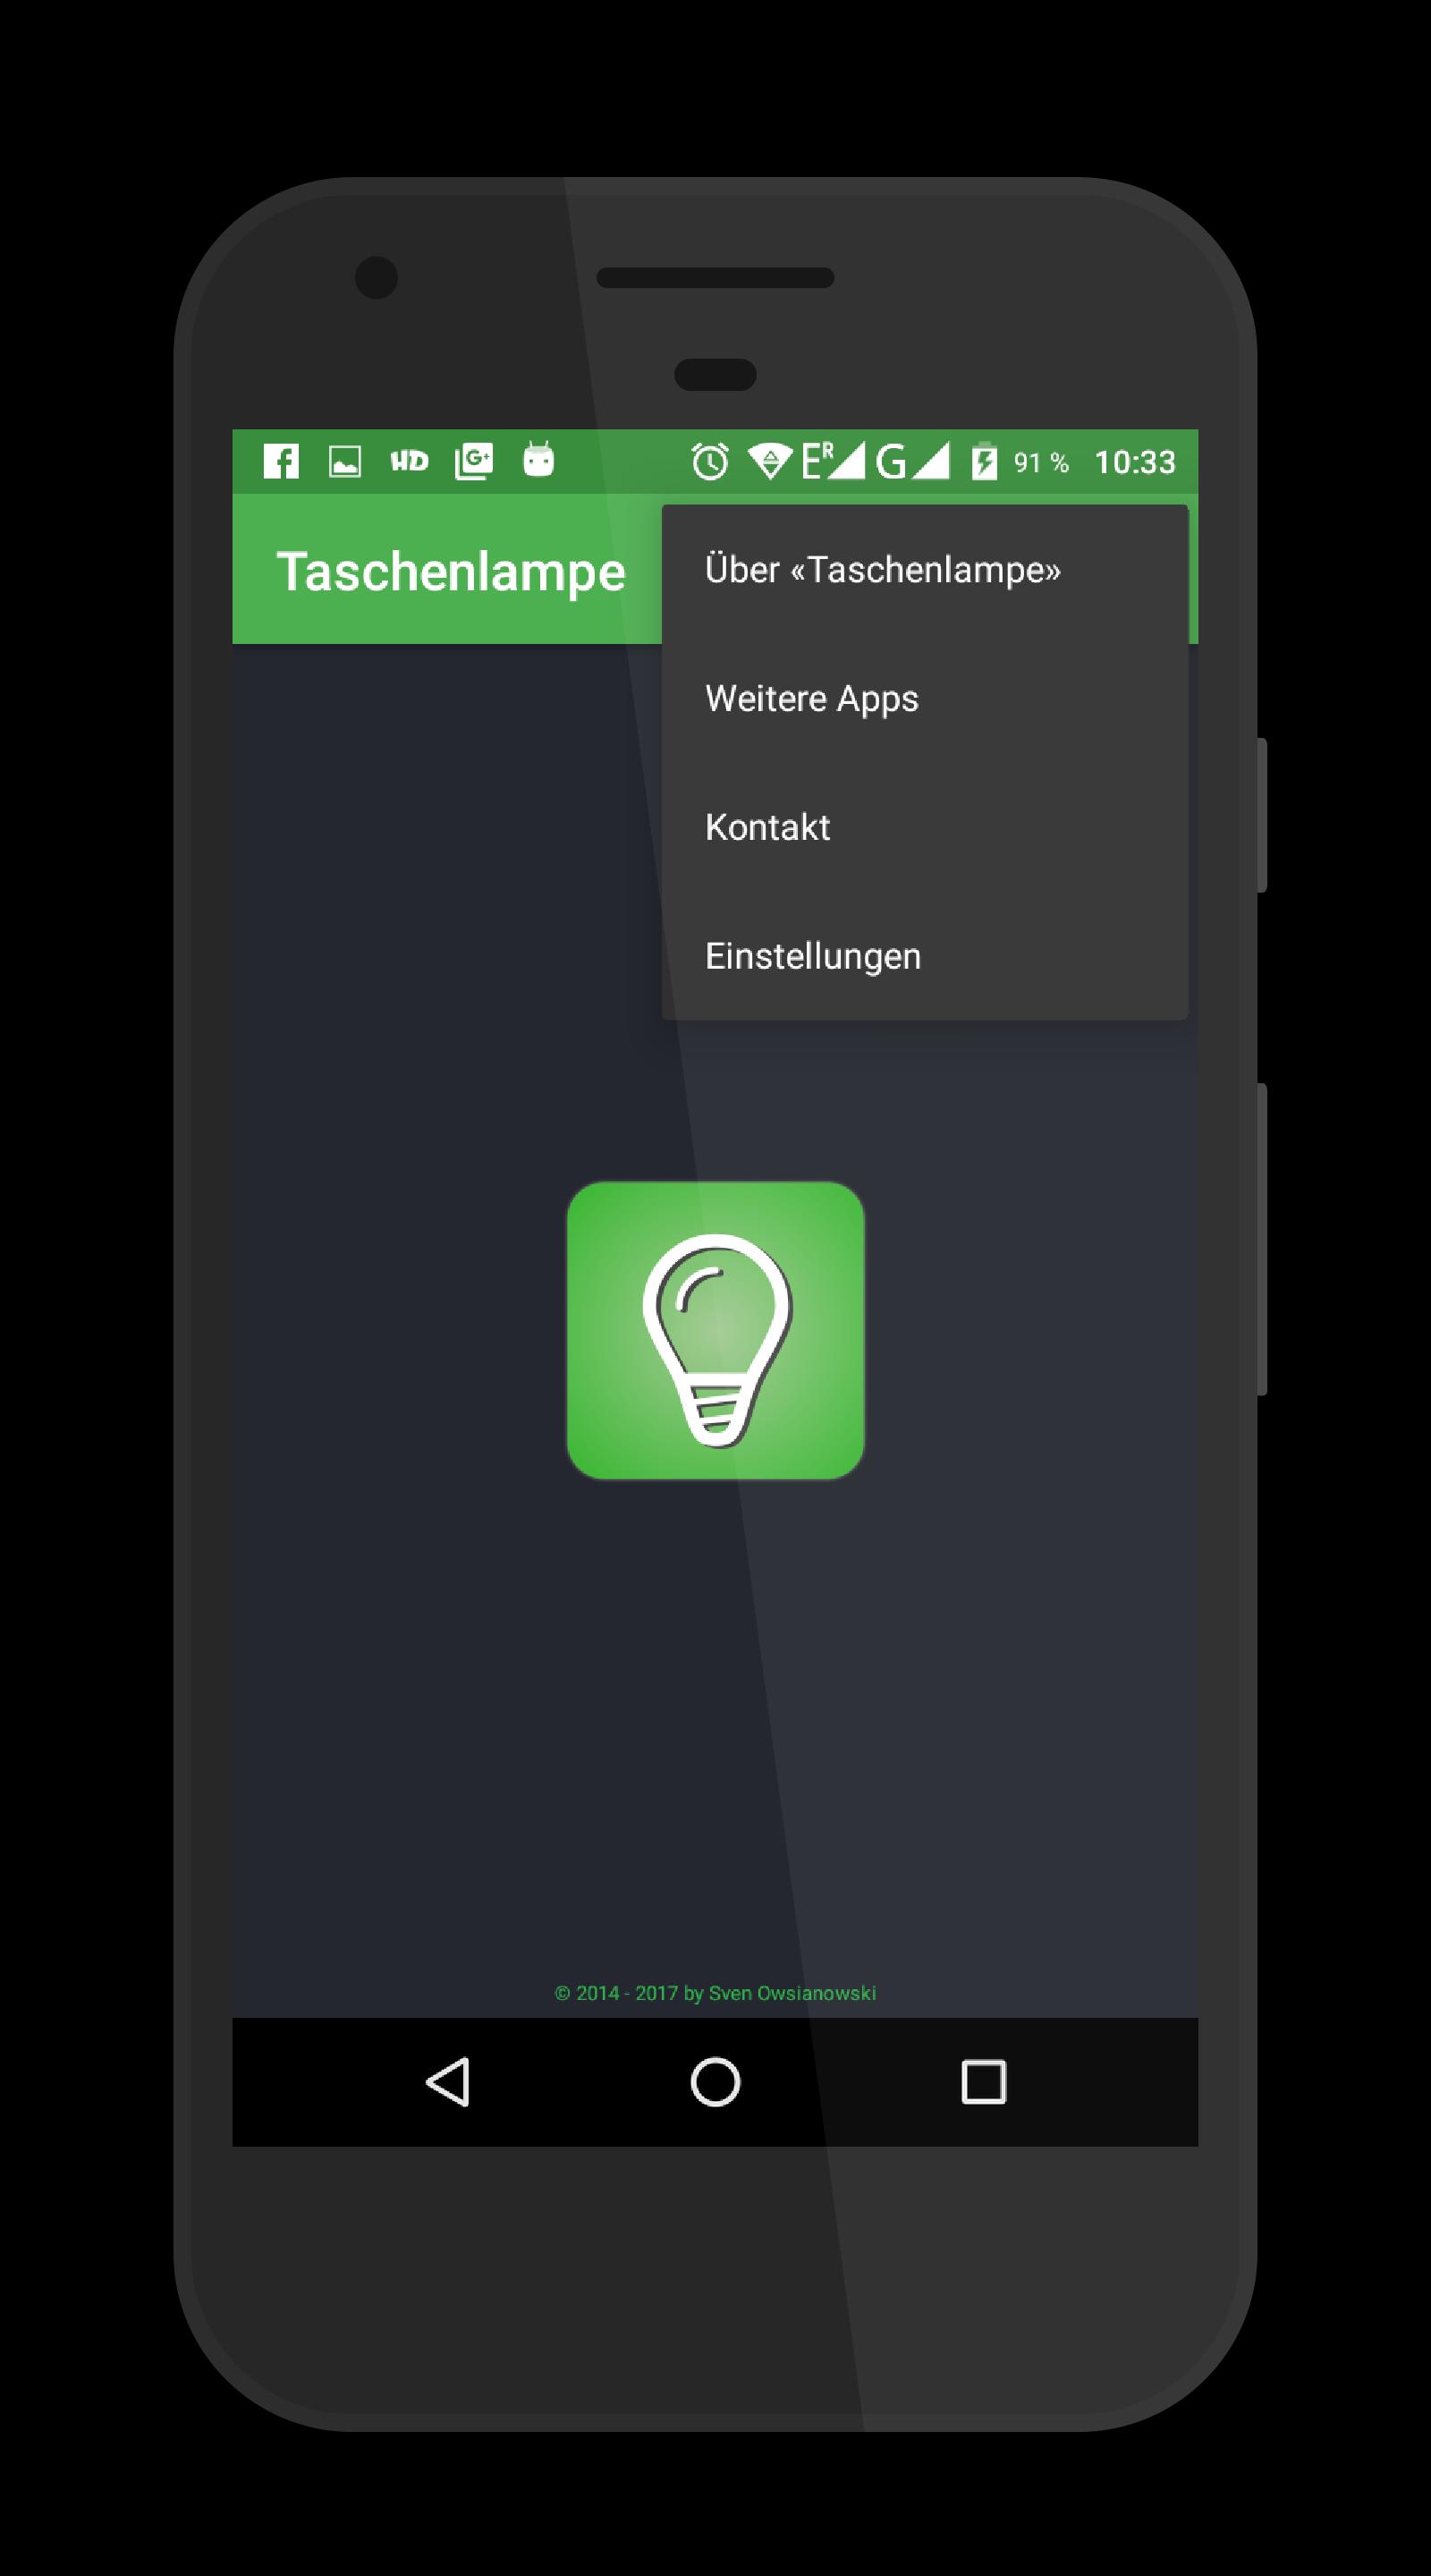 Taschenlampe for Android - APK Download